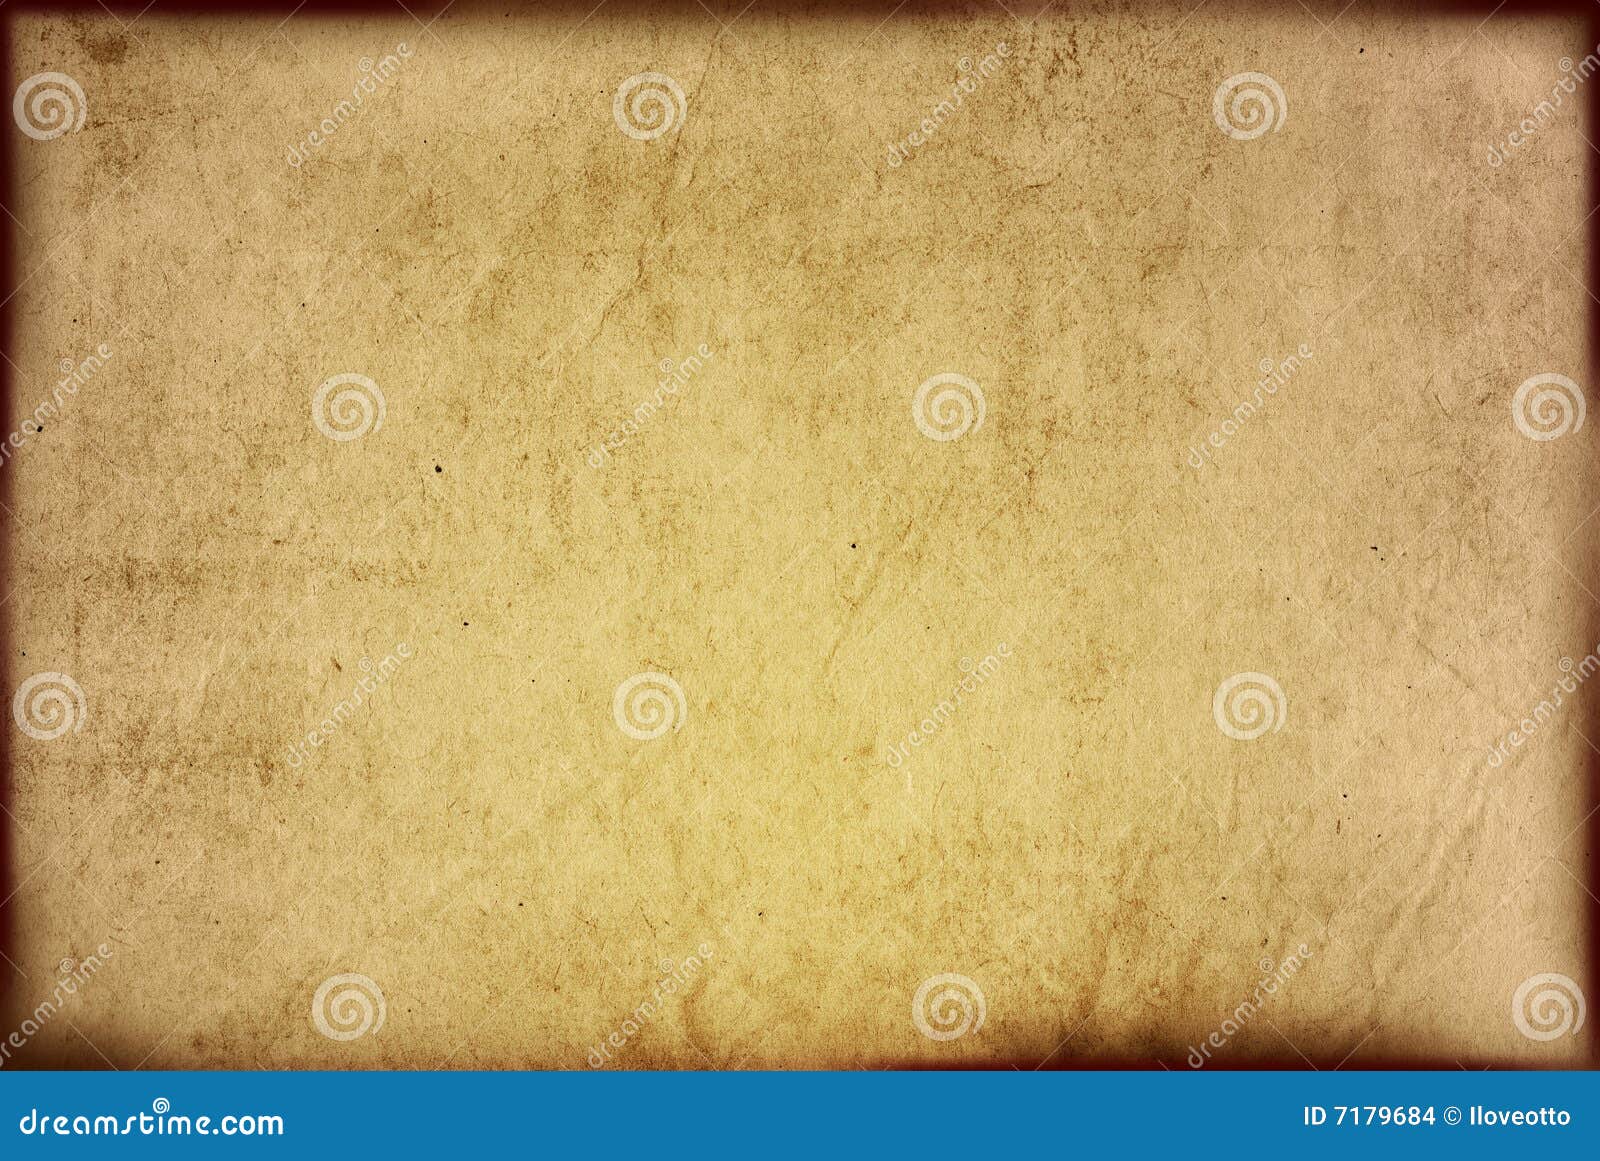 Old paper textures stock photo. Image of background, abrasion - 7179684